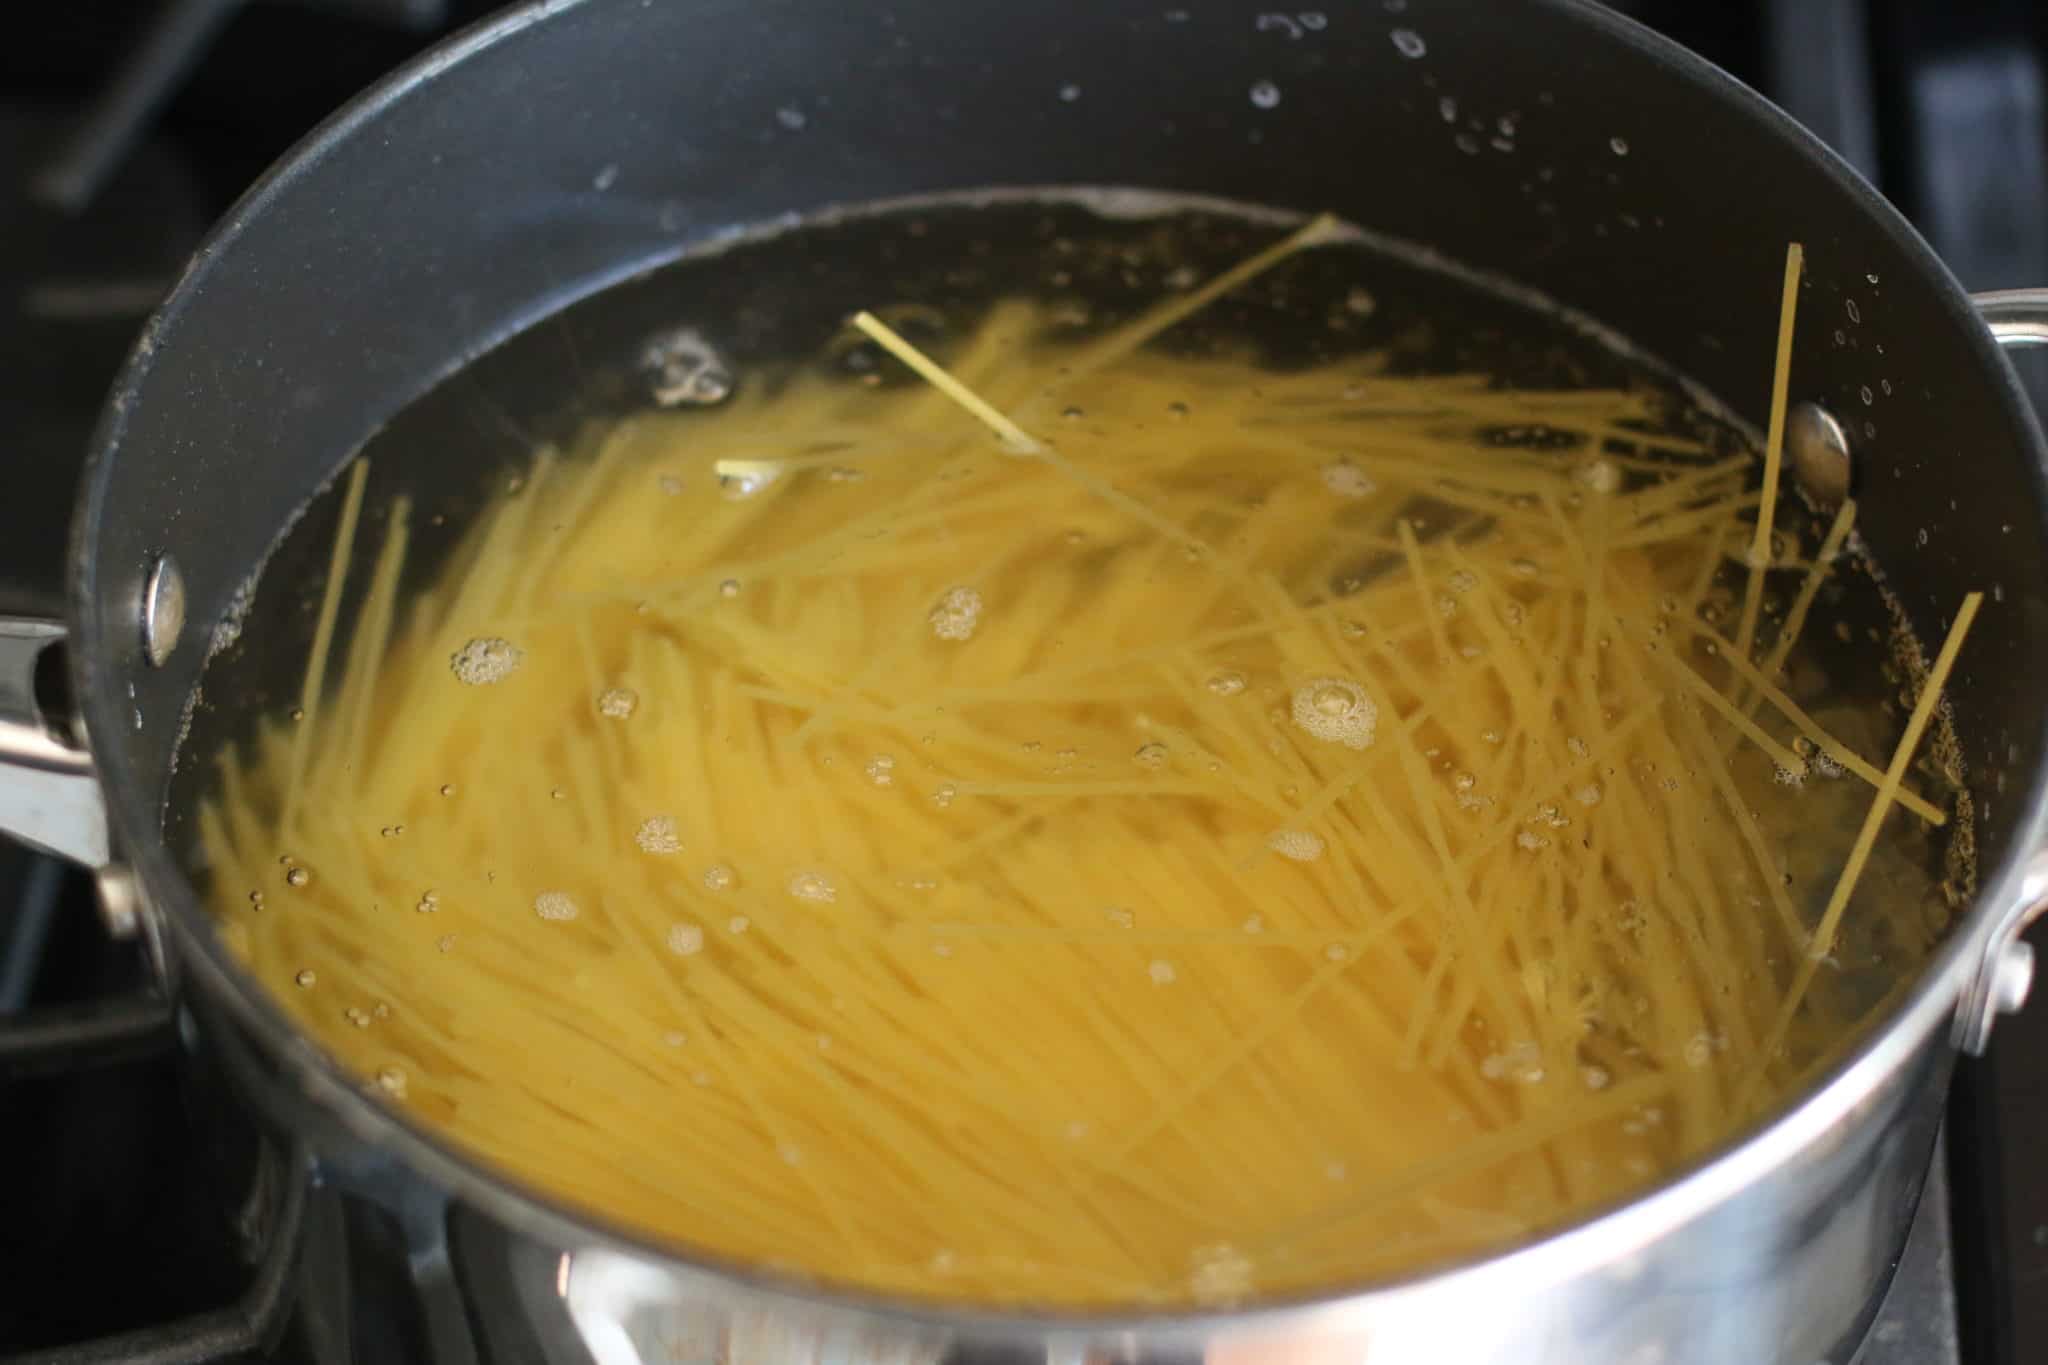 pot sized spaghetti noodles cooking in pot of boiling water